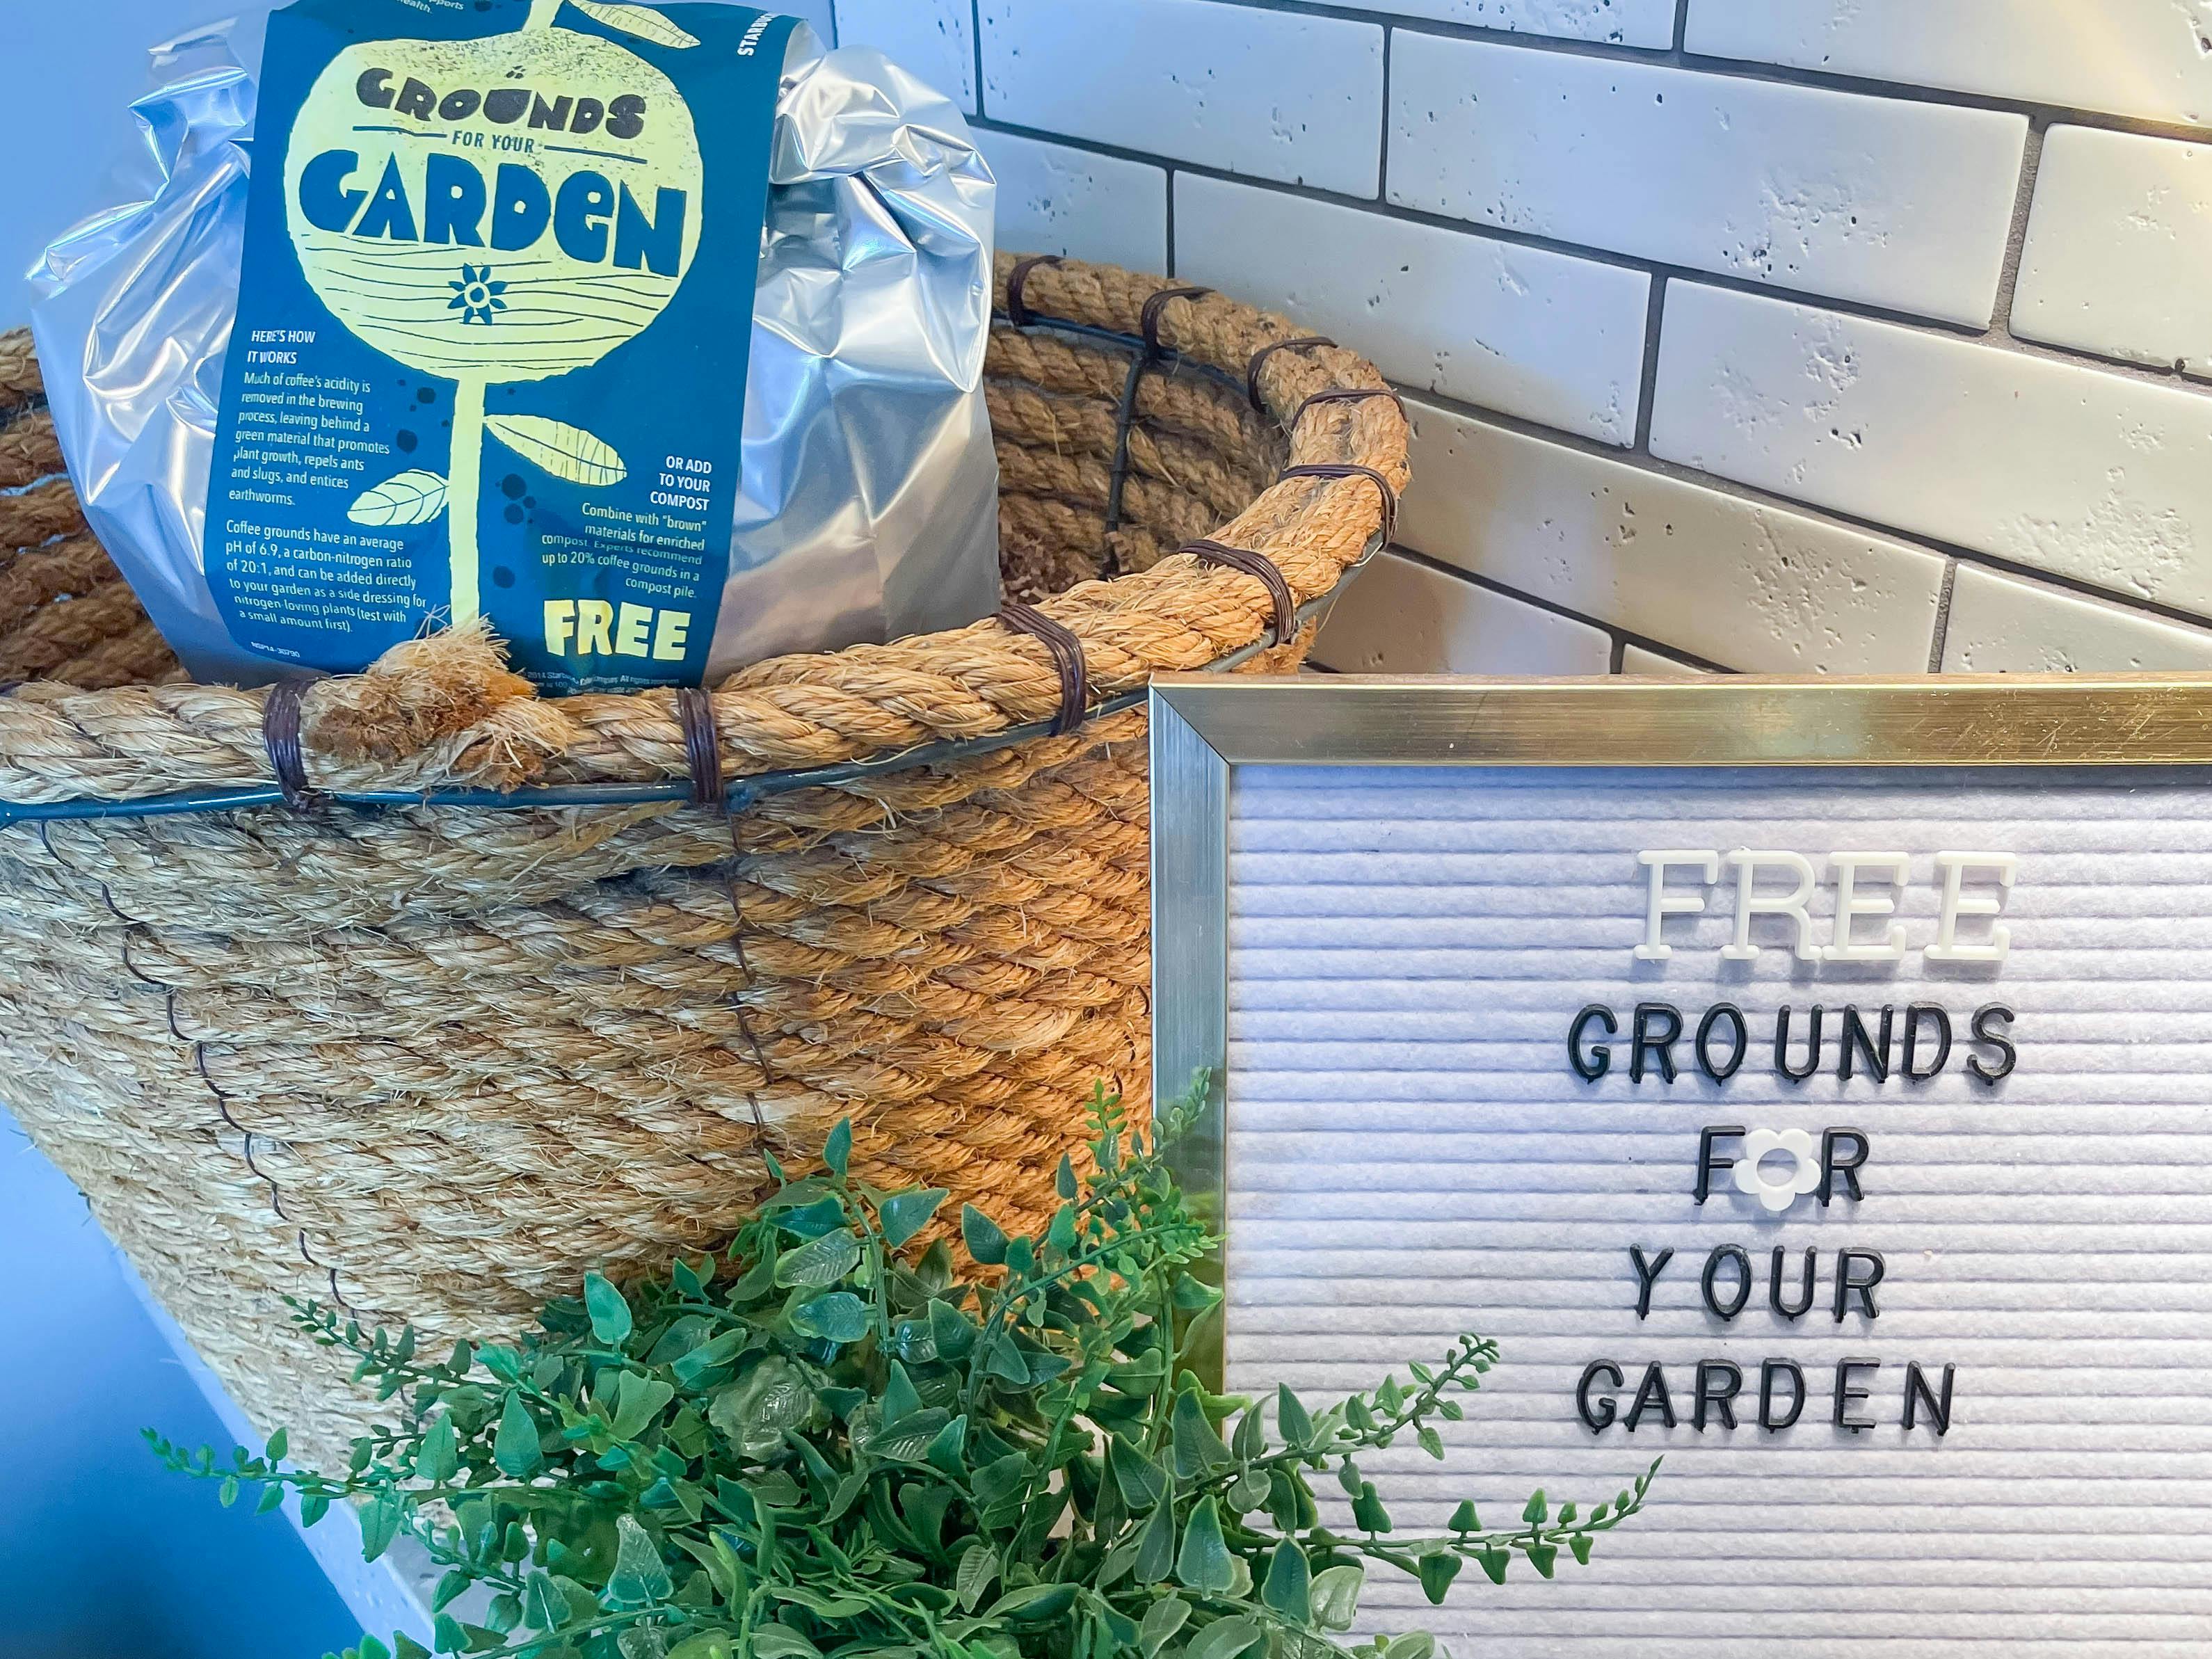 free starbucks coffee grounds for your garden